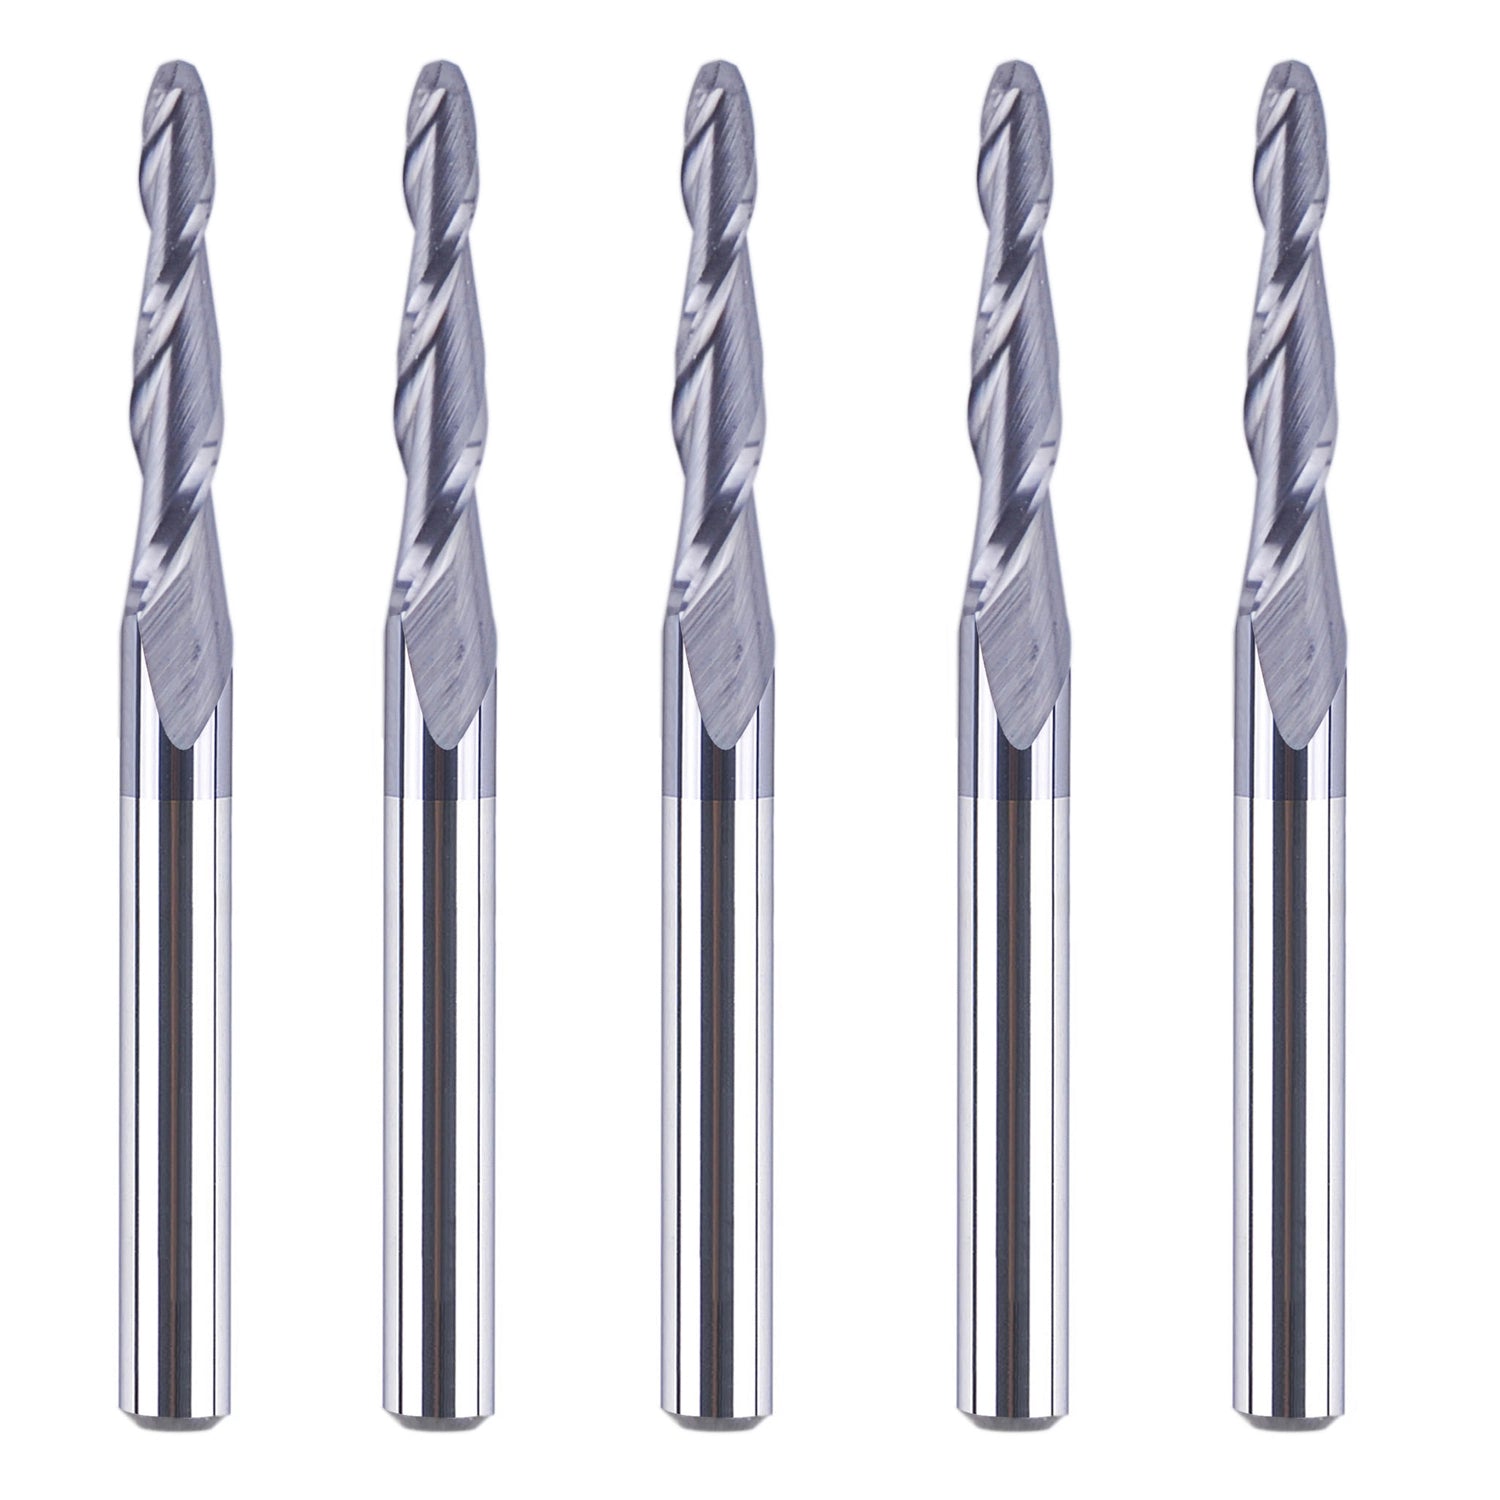 SpeTool 5Pcs 1.0mm Radius Tapered Ball Nose 3D 1/8 SHK TiAlN Coated Router Bit